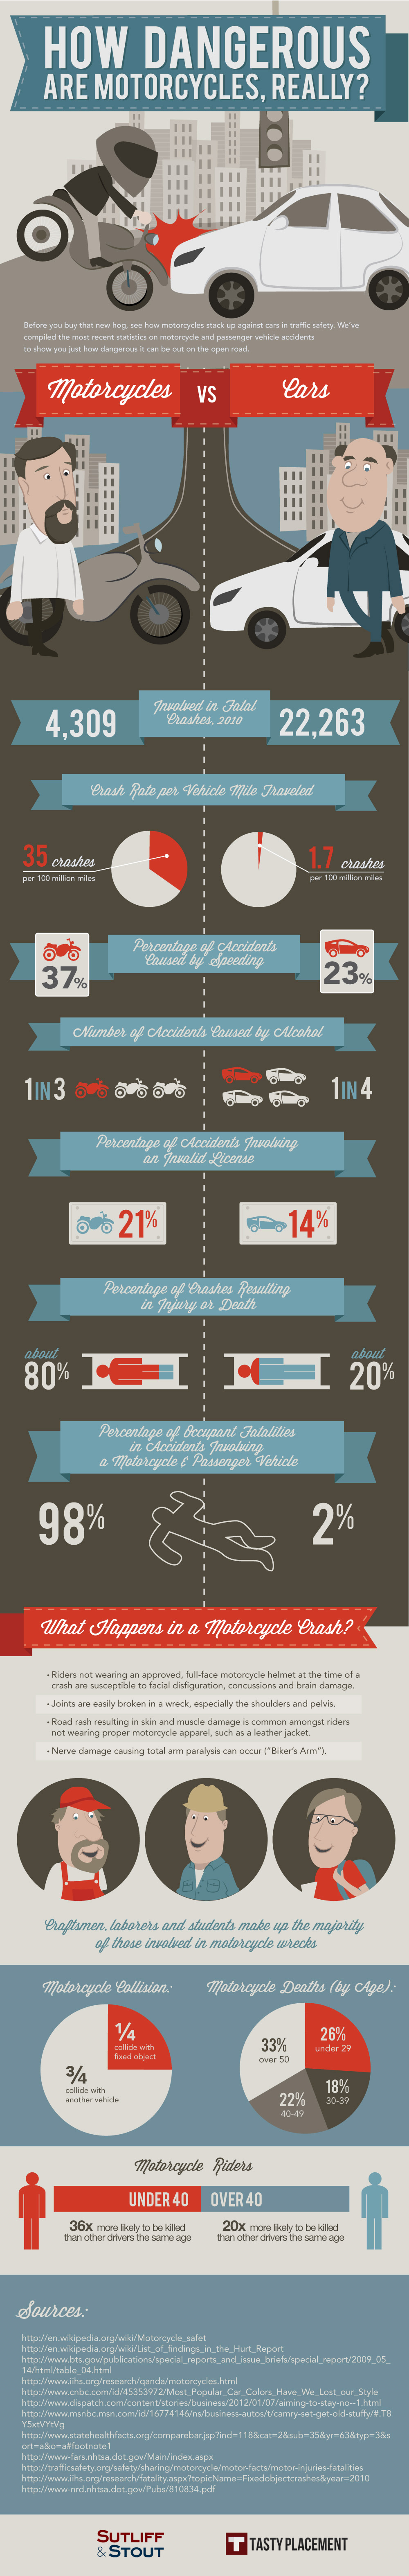 Motorcycles Vs Cars: Road Safety